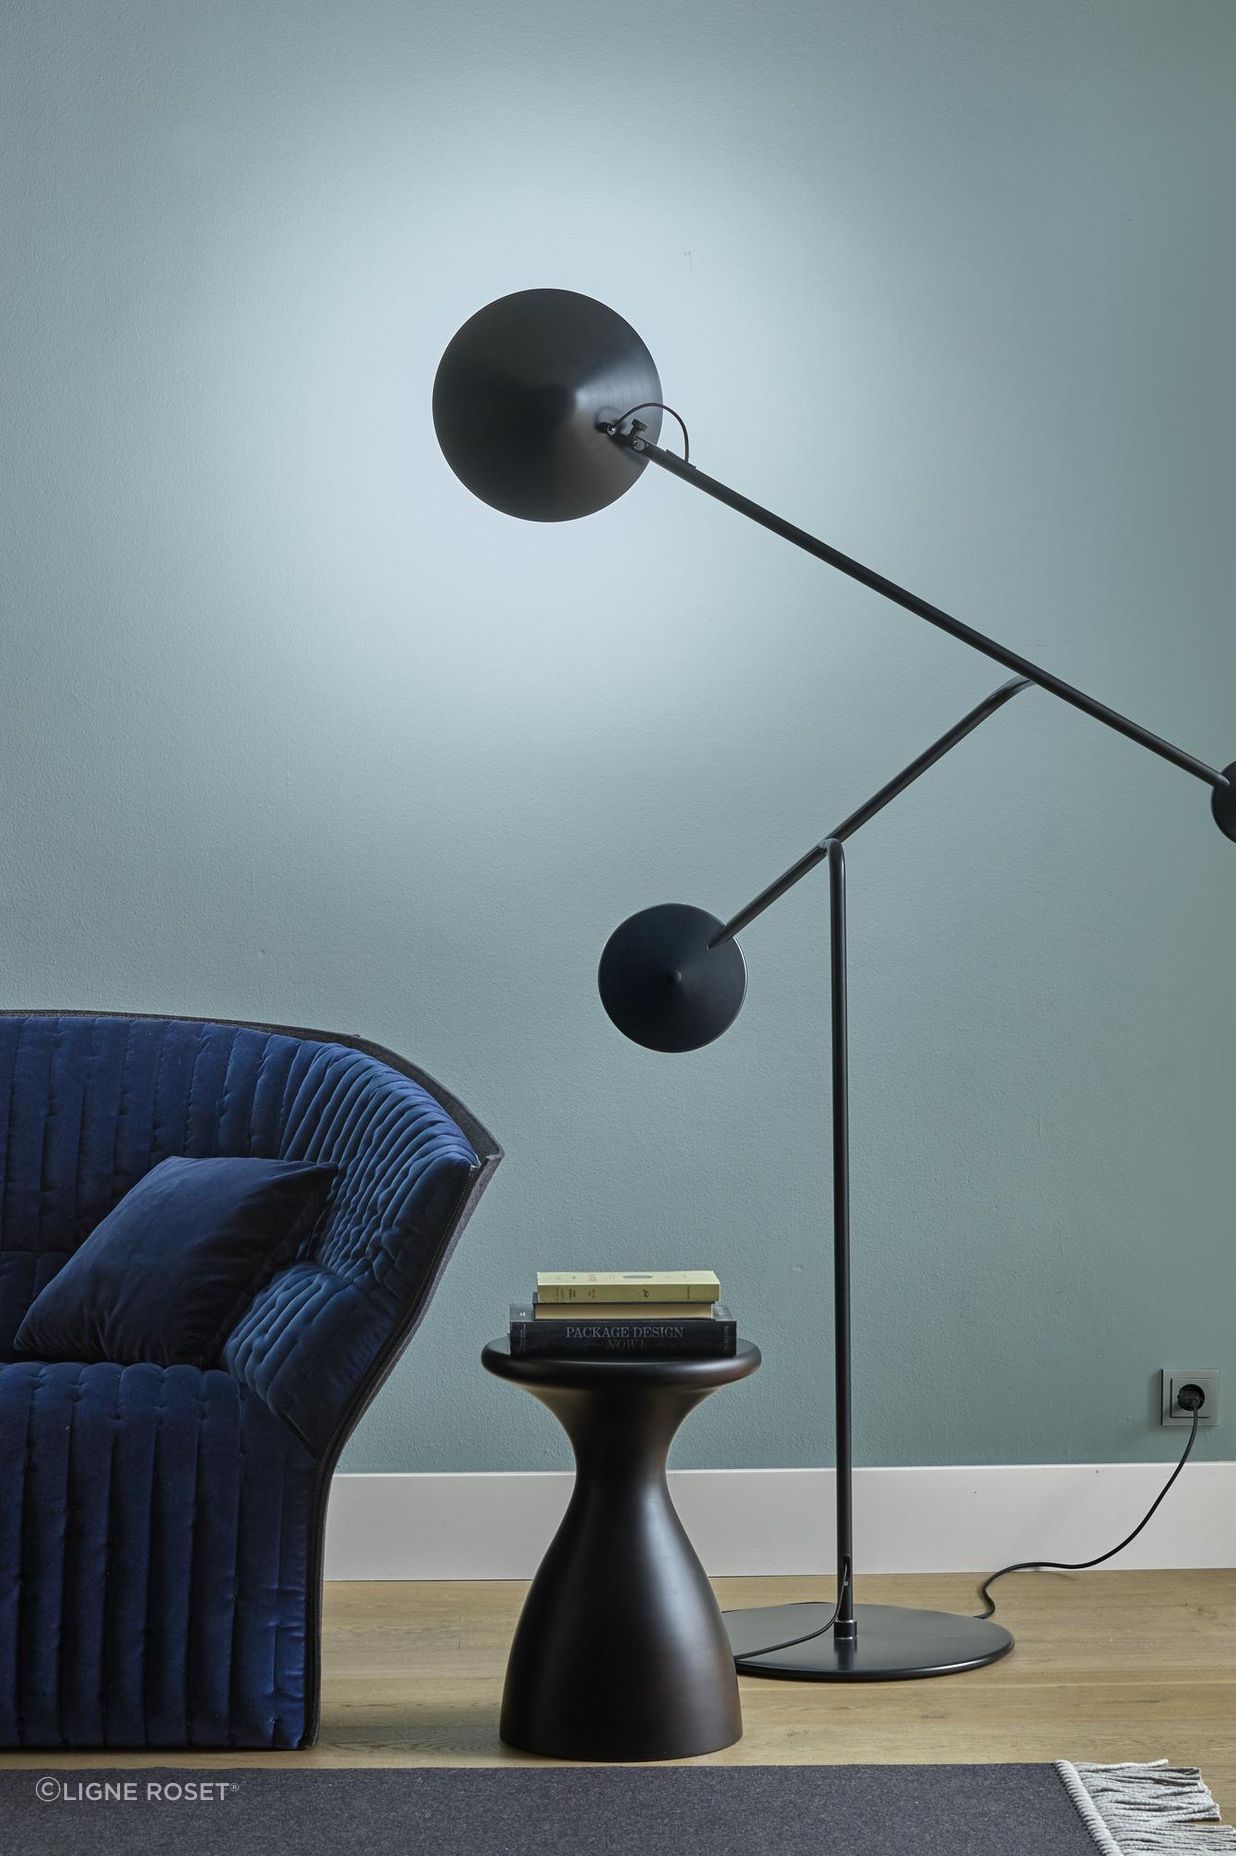 The multipurpose and designer inspired Cinétique Floor Lamp by Martin Hirth